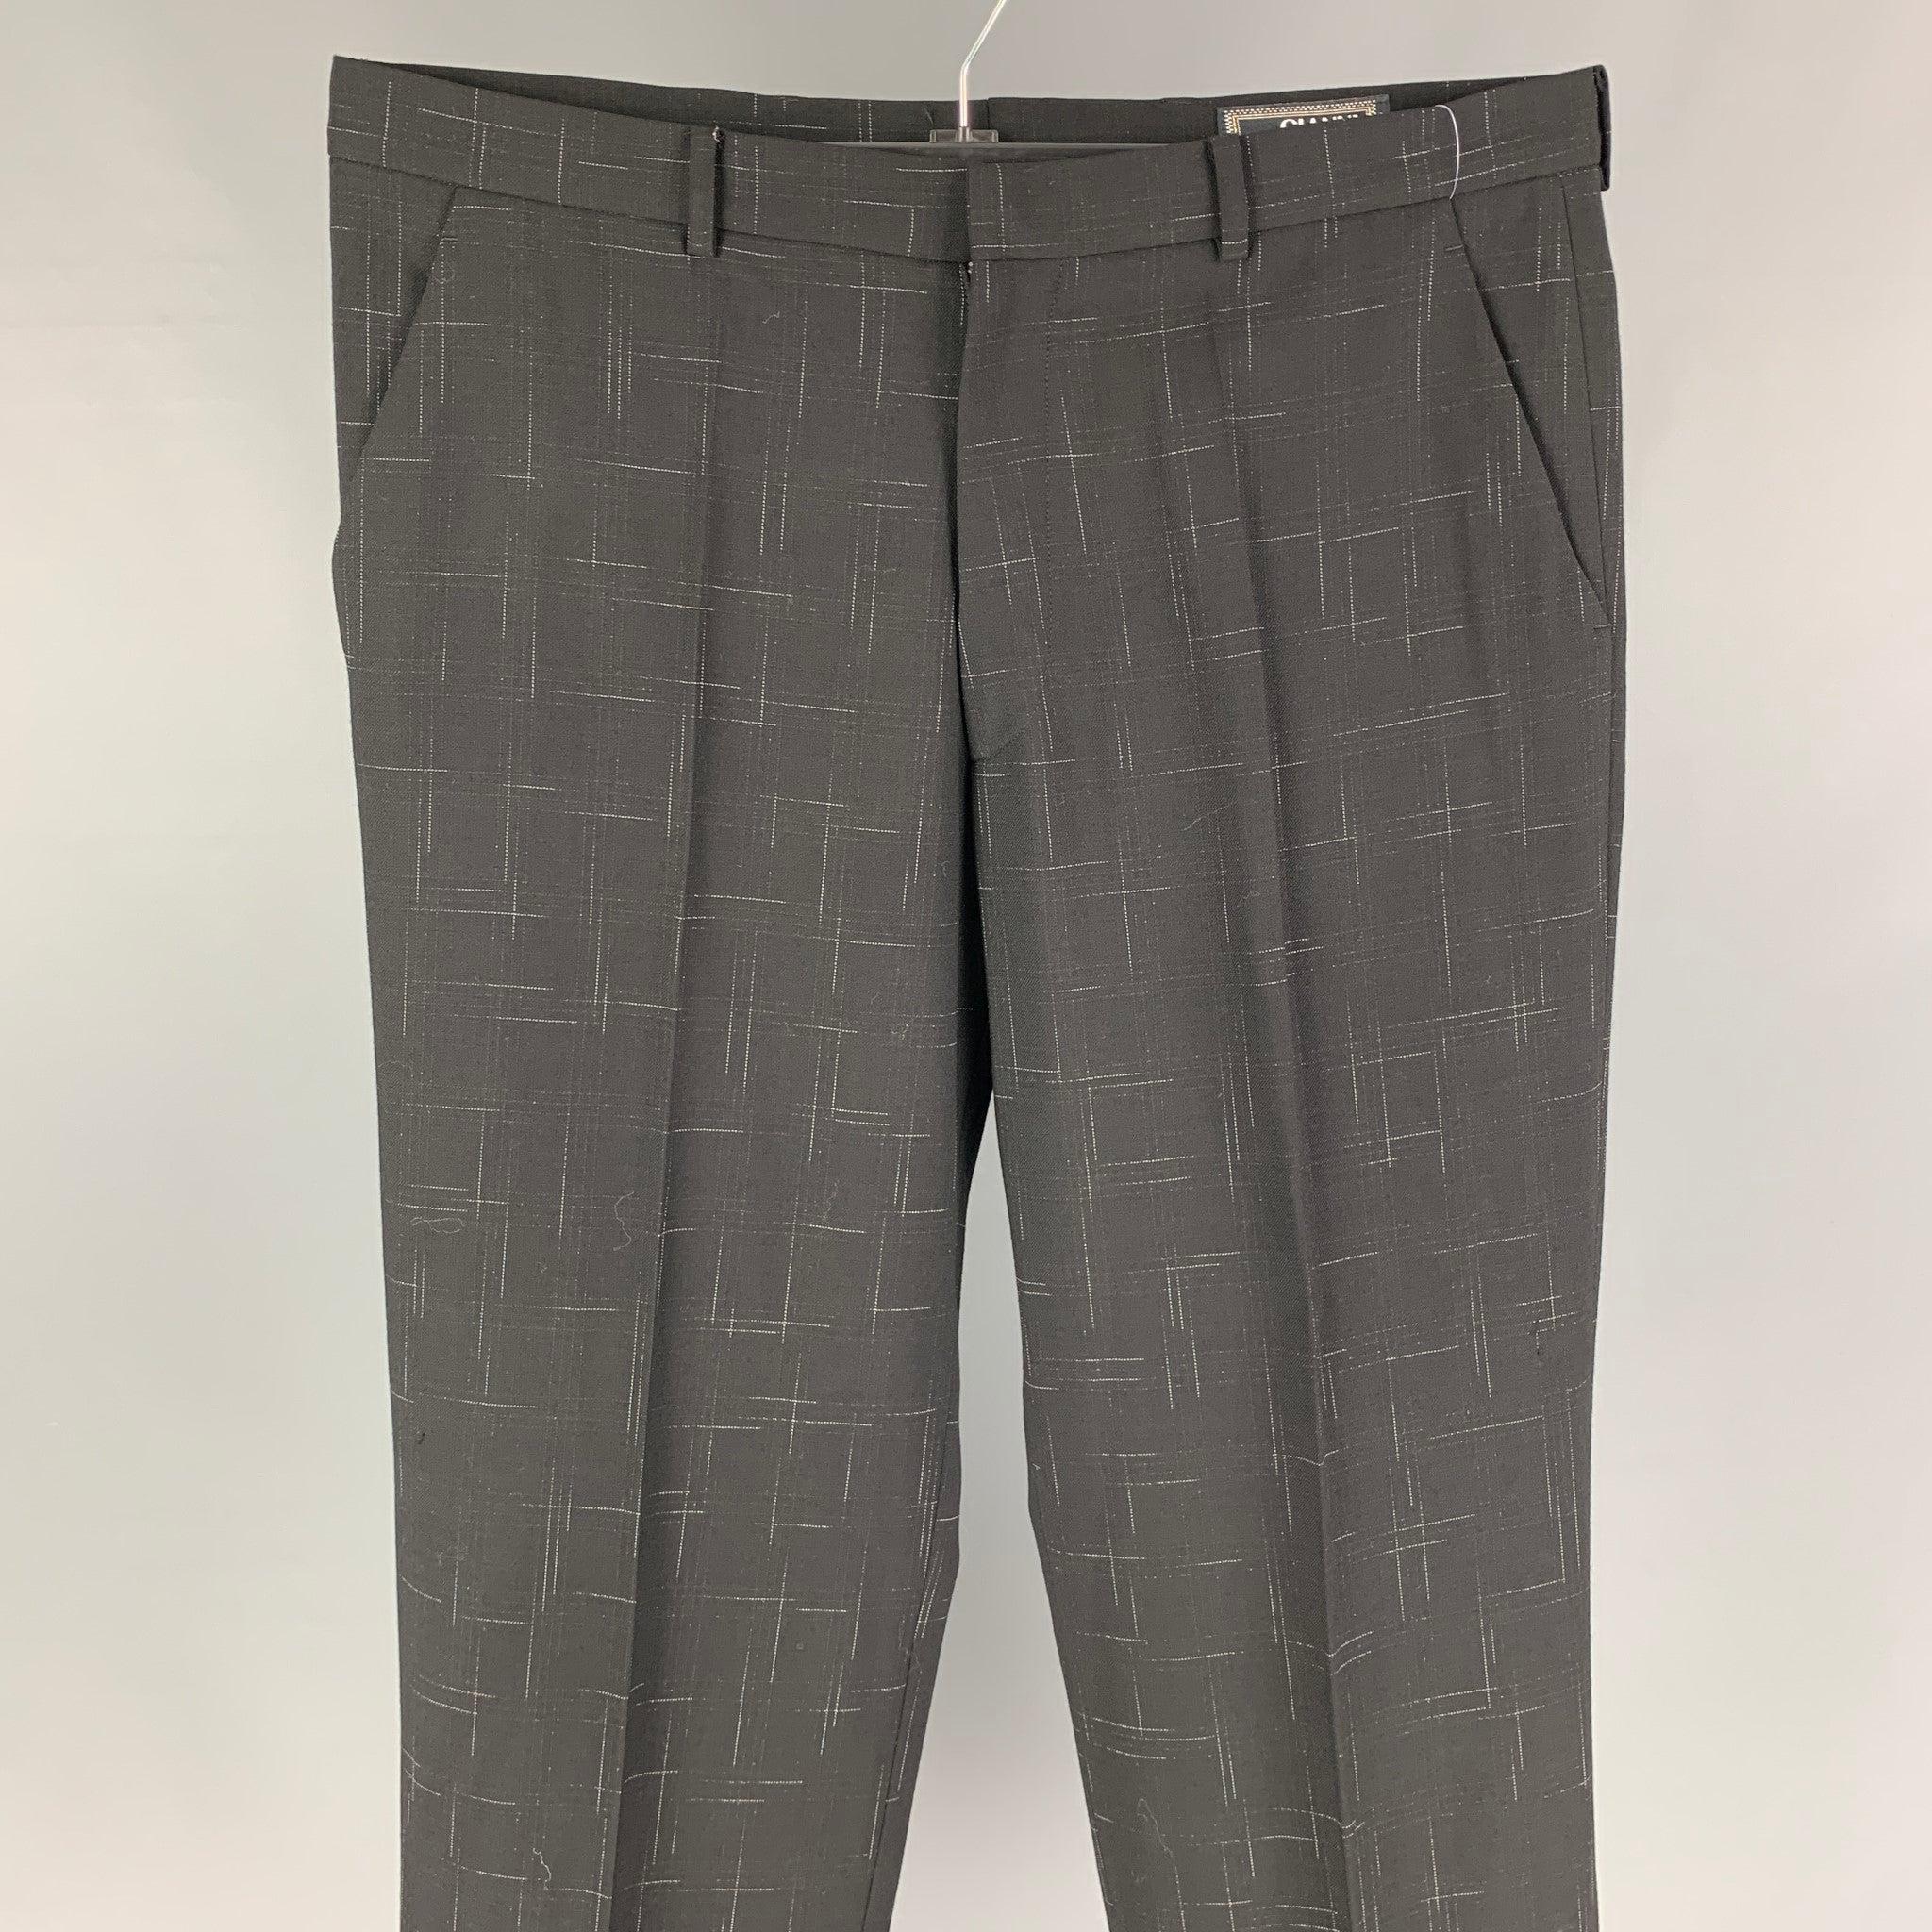 Vintage GIANNI VERSACE dress pants comes in a black print wool featuring a flat front, cuffed leg, front tab, and a zip fly closure. Made in Italy.
Very Good
Pre-Owned Condition. 

Marked:   52 

Measurements: 
  Waist: 36 inches  Rise: 11.5 inches 